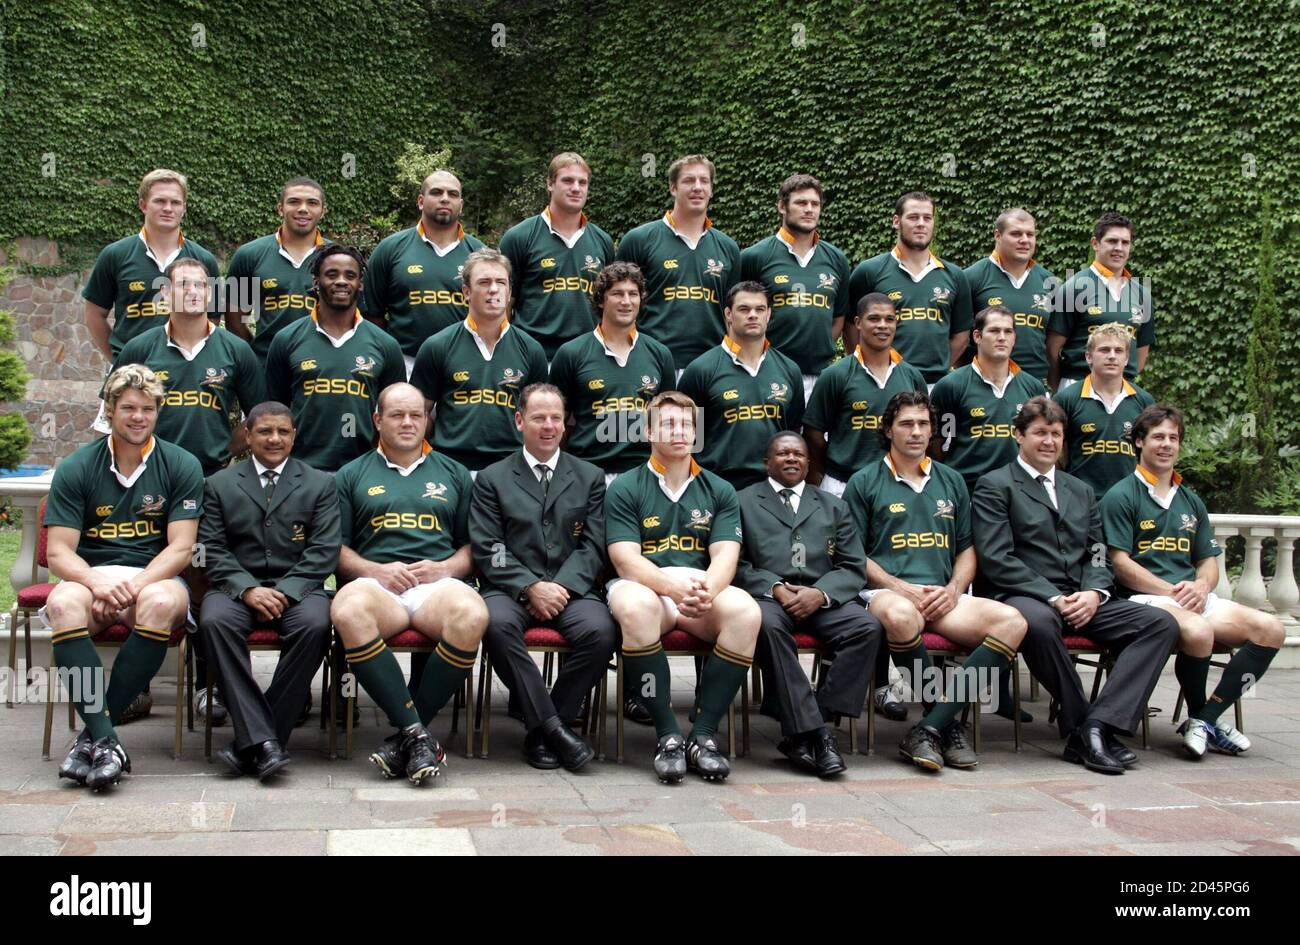 South Africa's rugby team Springboks pose in the garden of the hotel where  they are staying in Buenos Aires, December 3, 2004. The Springboks faces Argentina's  Los Pumas in a test match